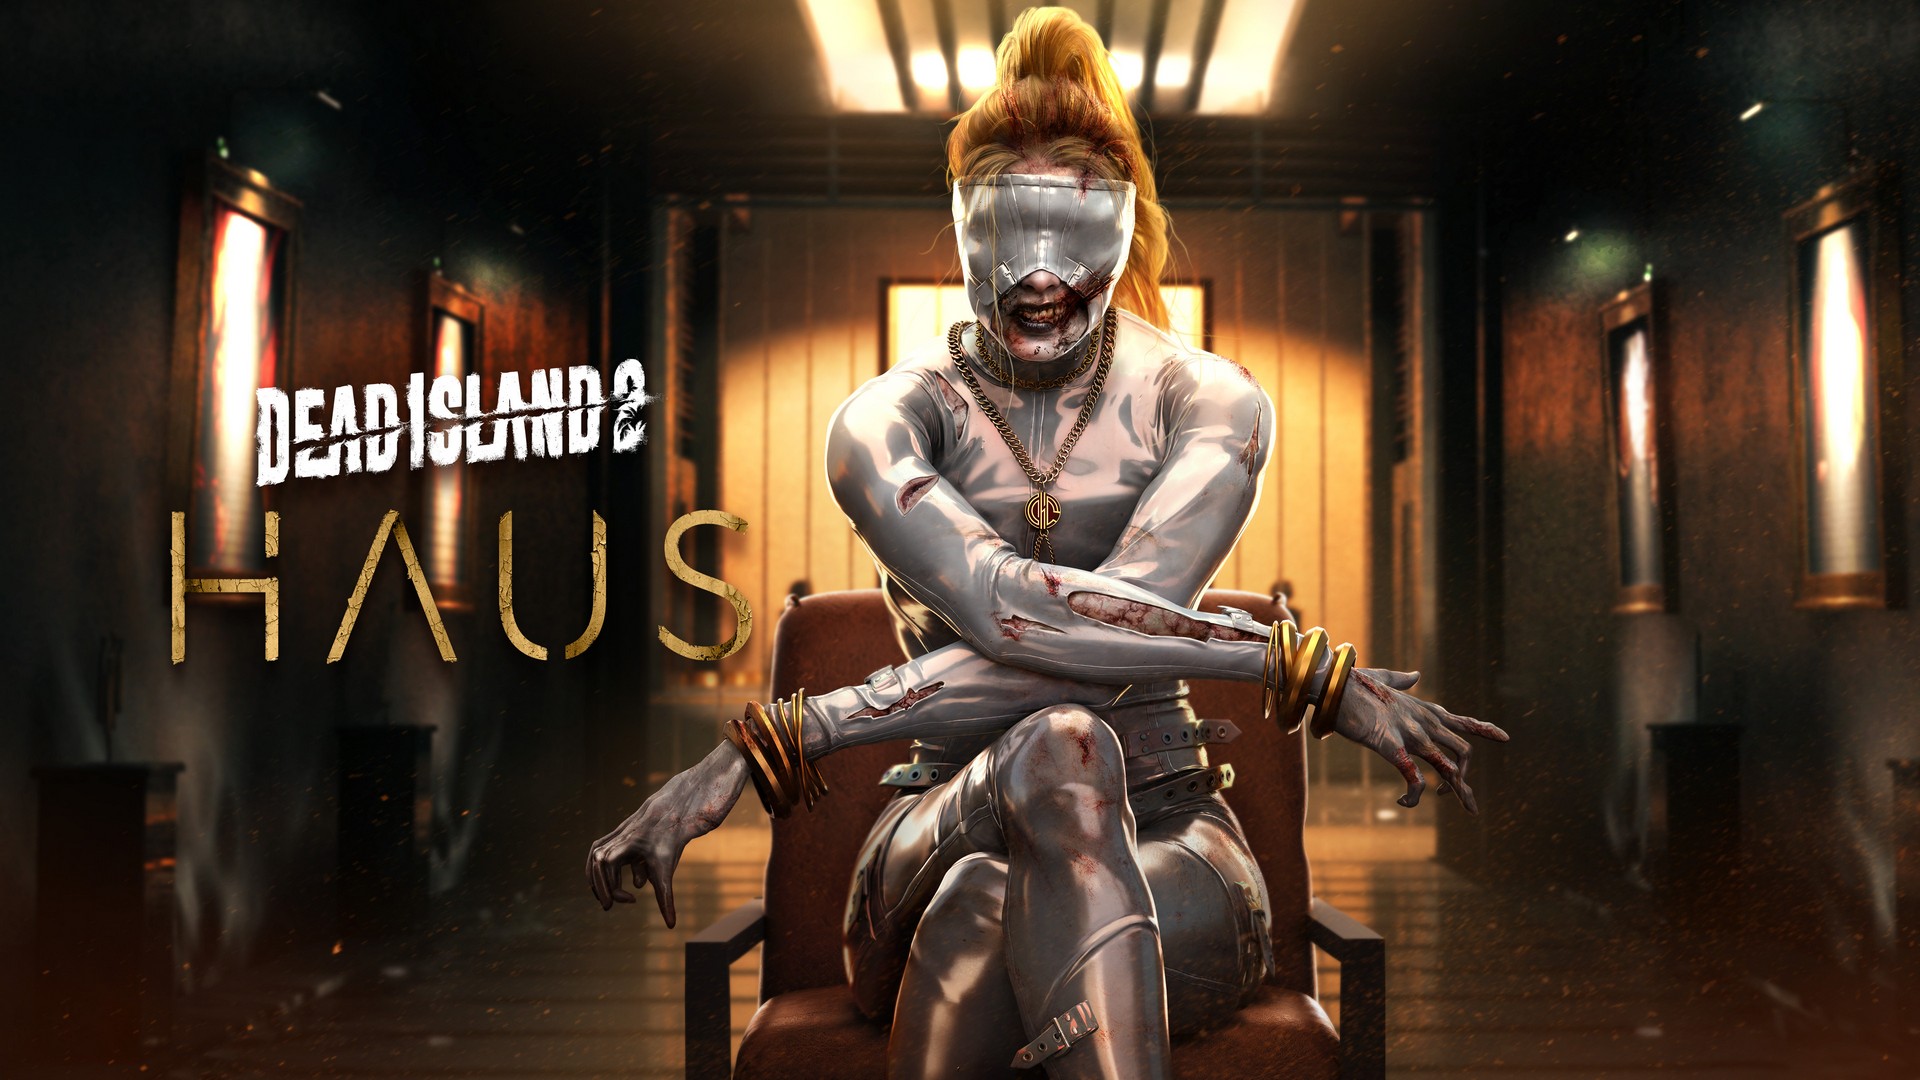 A Horrific Launch Trailer As Dead Island 2’s First Expansion “Haus” – Hits Stores